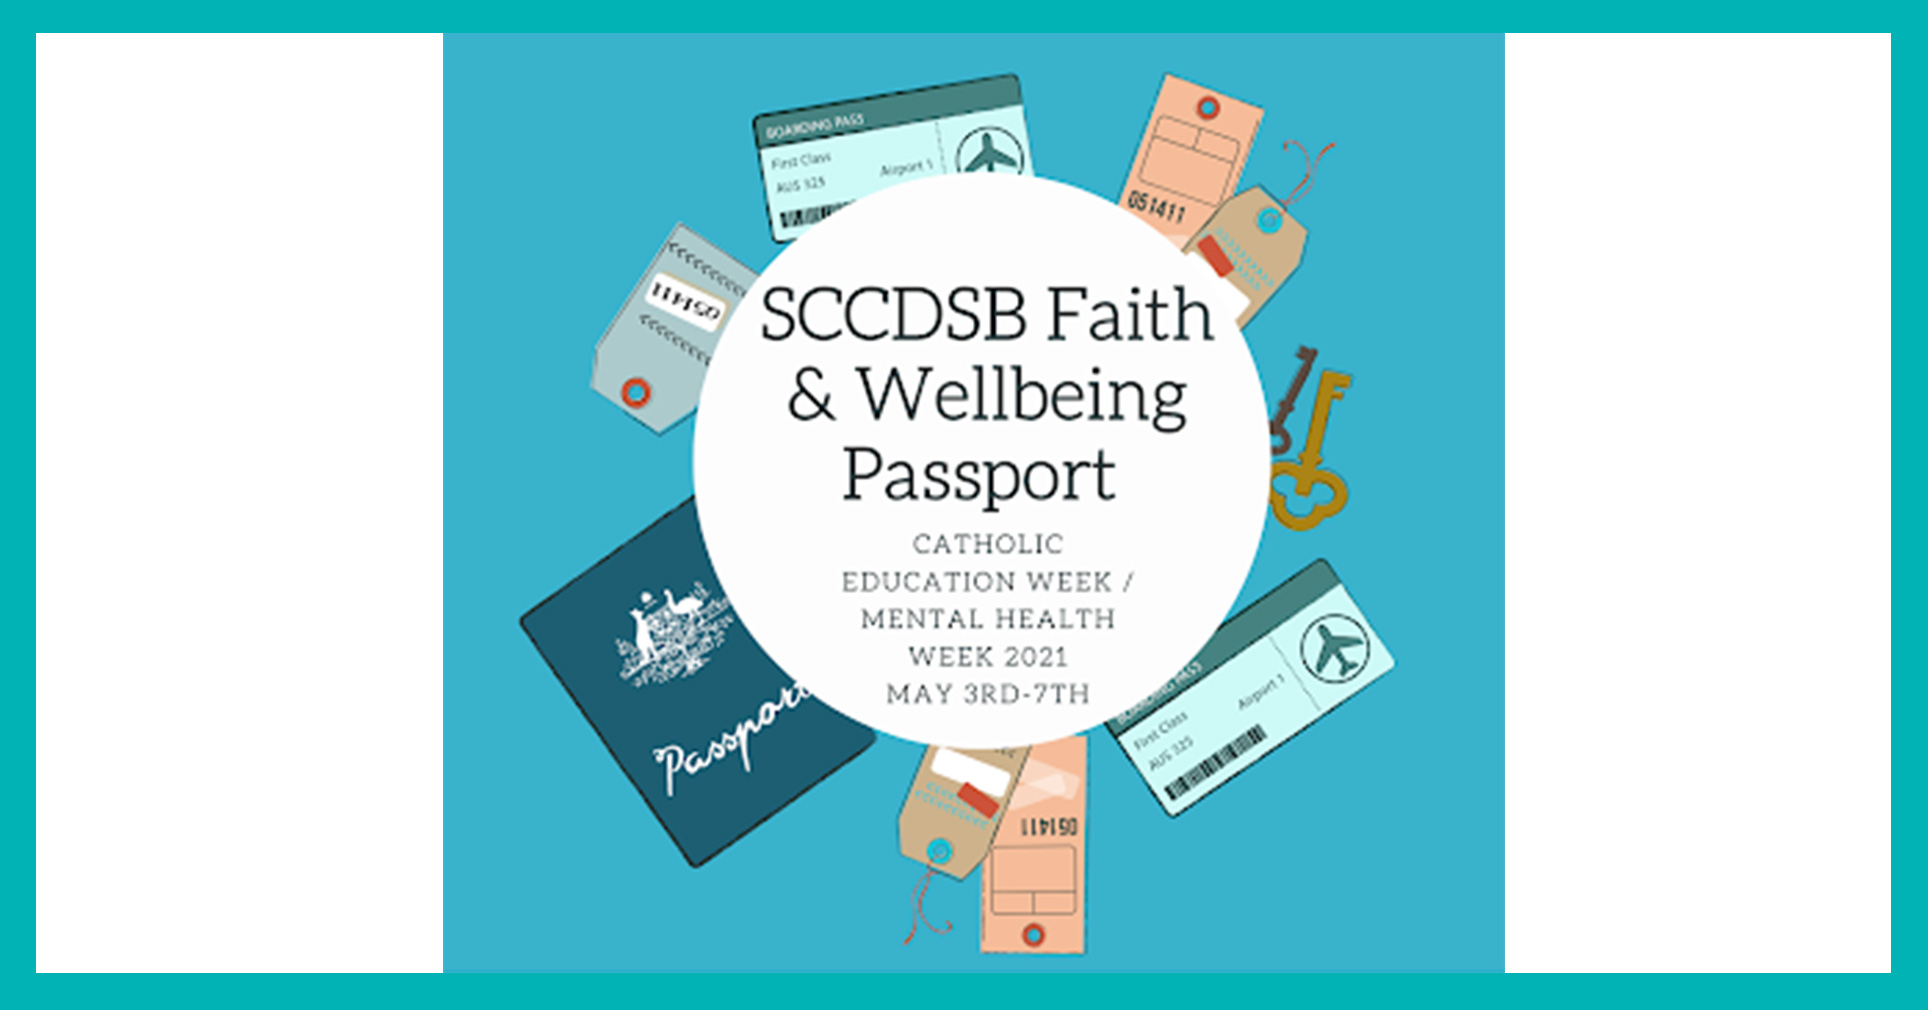 Faith and Wellbeing Passport For Families in Celebration of Catholic Education and Mental Health Week